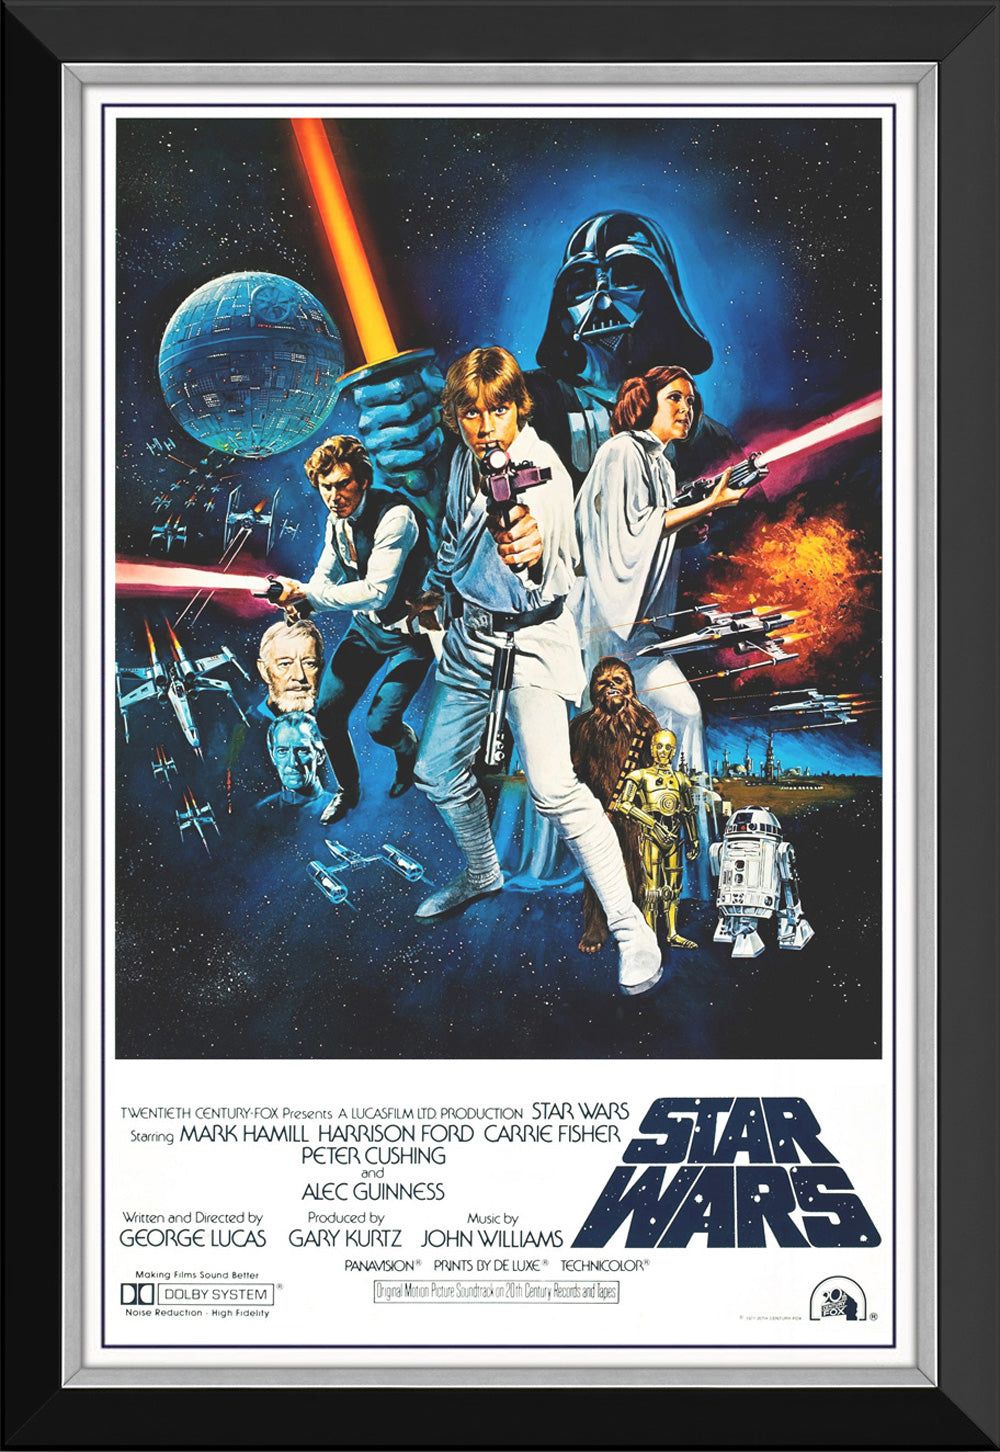 Star Wars Ep Iv A New Hope - Blasters - Movie Poster Reprint Framed Classic, Star Wars, Pop Culture Art, Movies, Collectibile Memorabilia, AAAPM32603